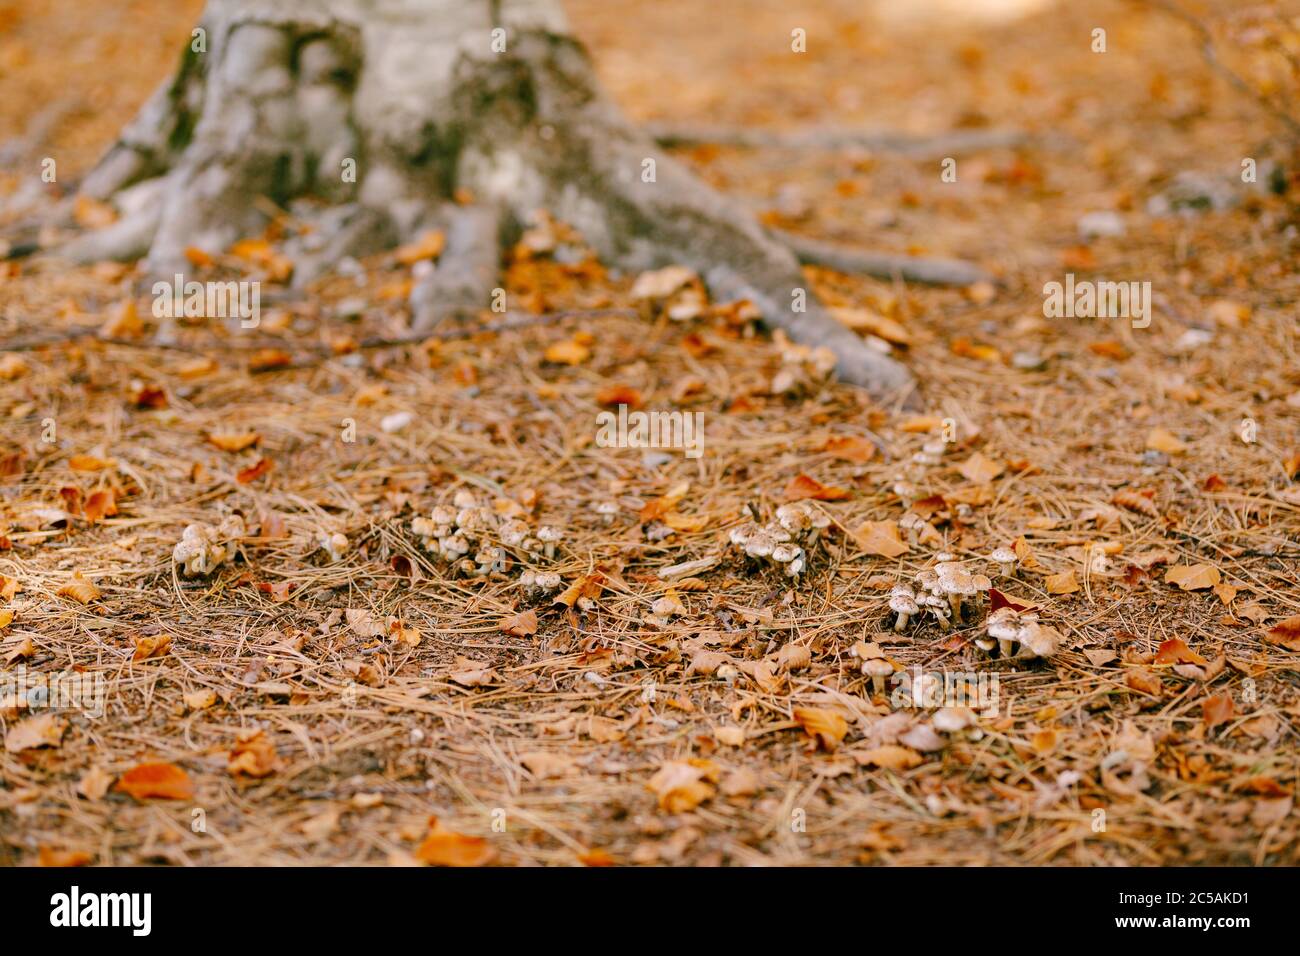 Lots of mushrooms hebeloma sinapizans in the pine forest, under the yellow autumn leaves on the floor. Stock Photo